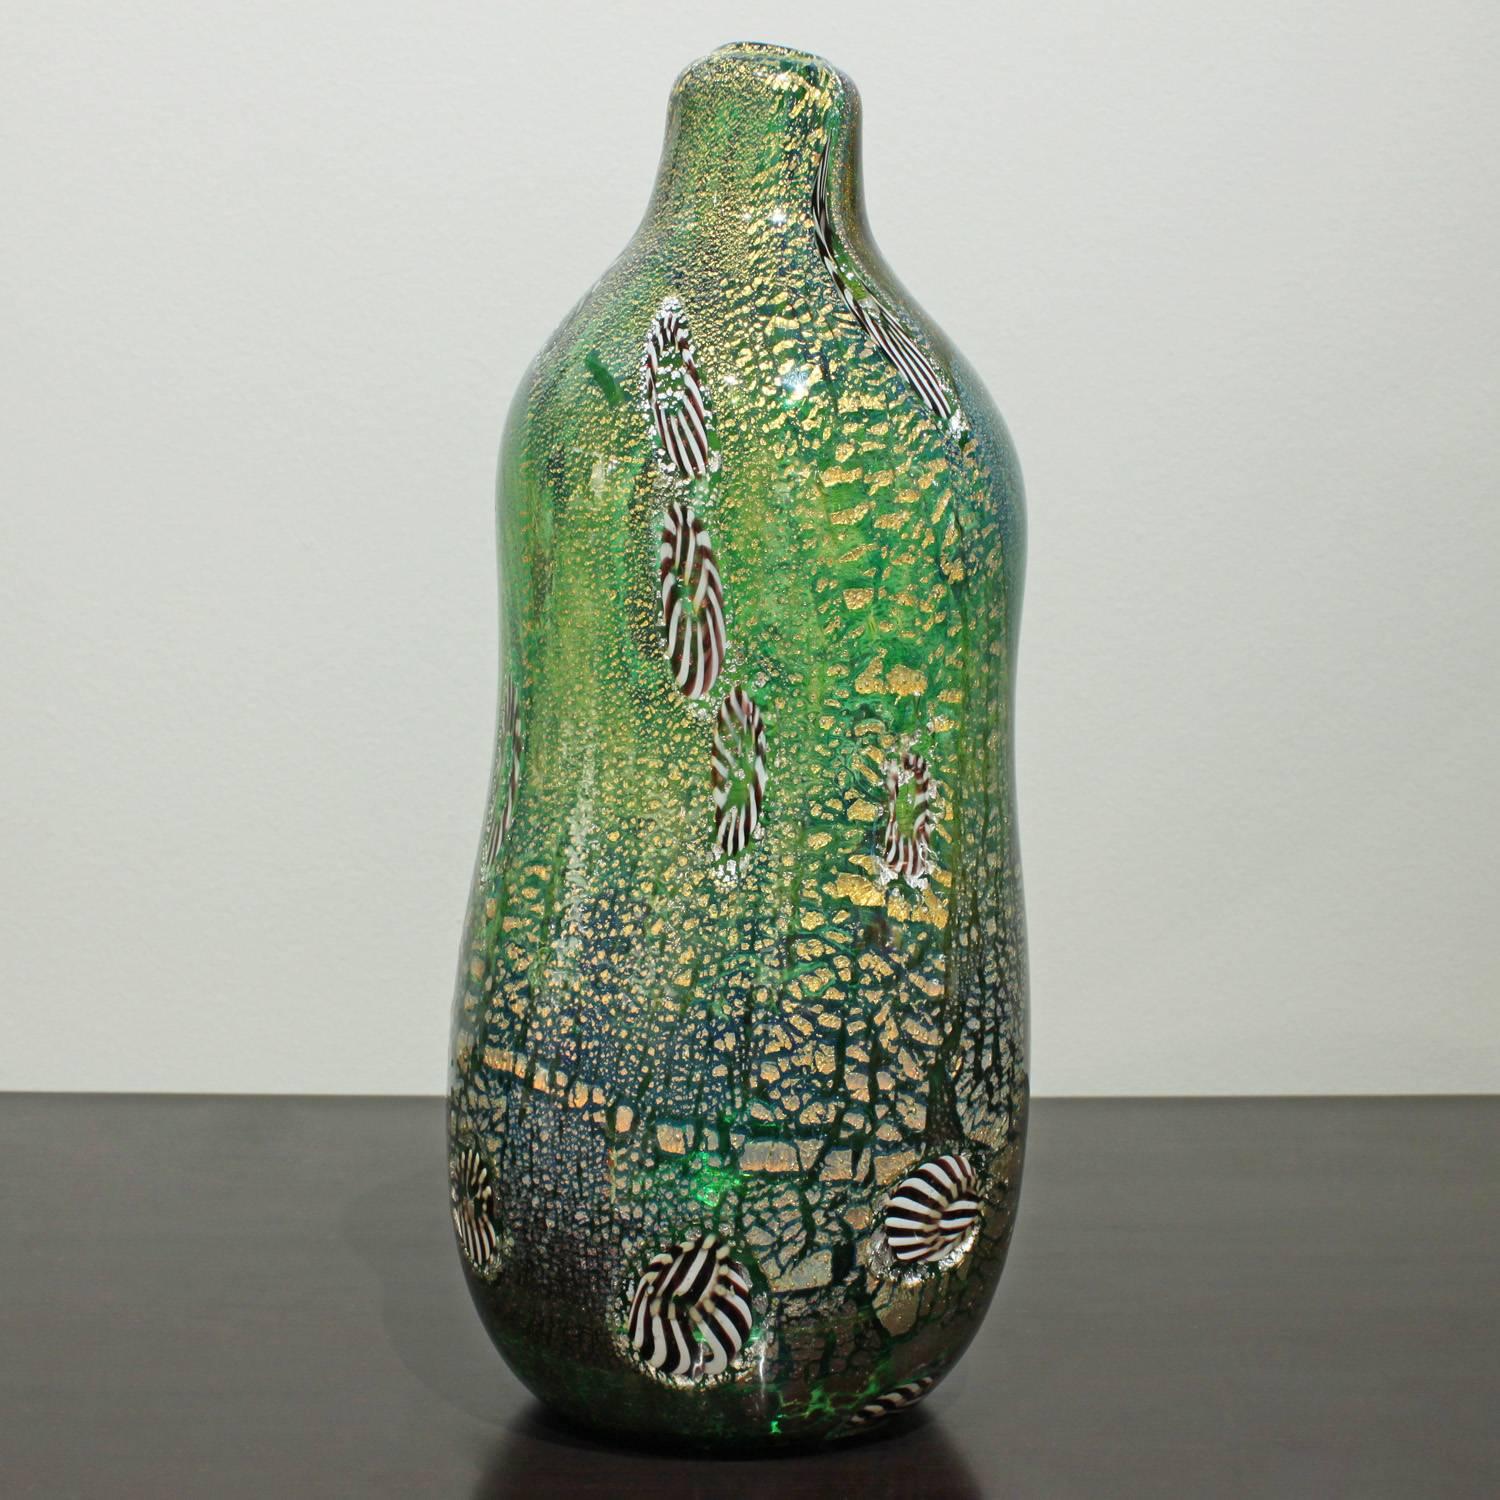 Handblown glass vase from the Yokohama series, green glass with murrhines and silver foil, by Aldo Nason for Arte Vetraria Muranese (A.V.E.M.), Murano Italy, 1960s (signed on bottom).
   